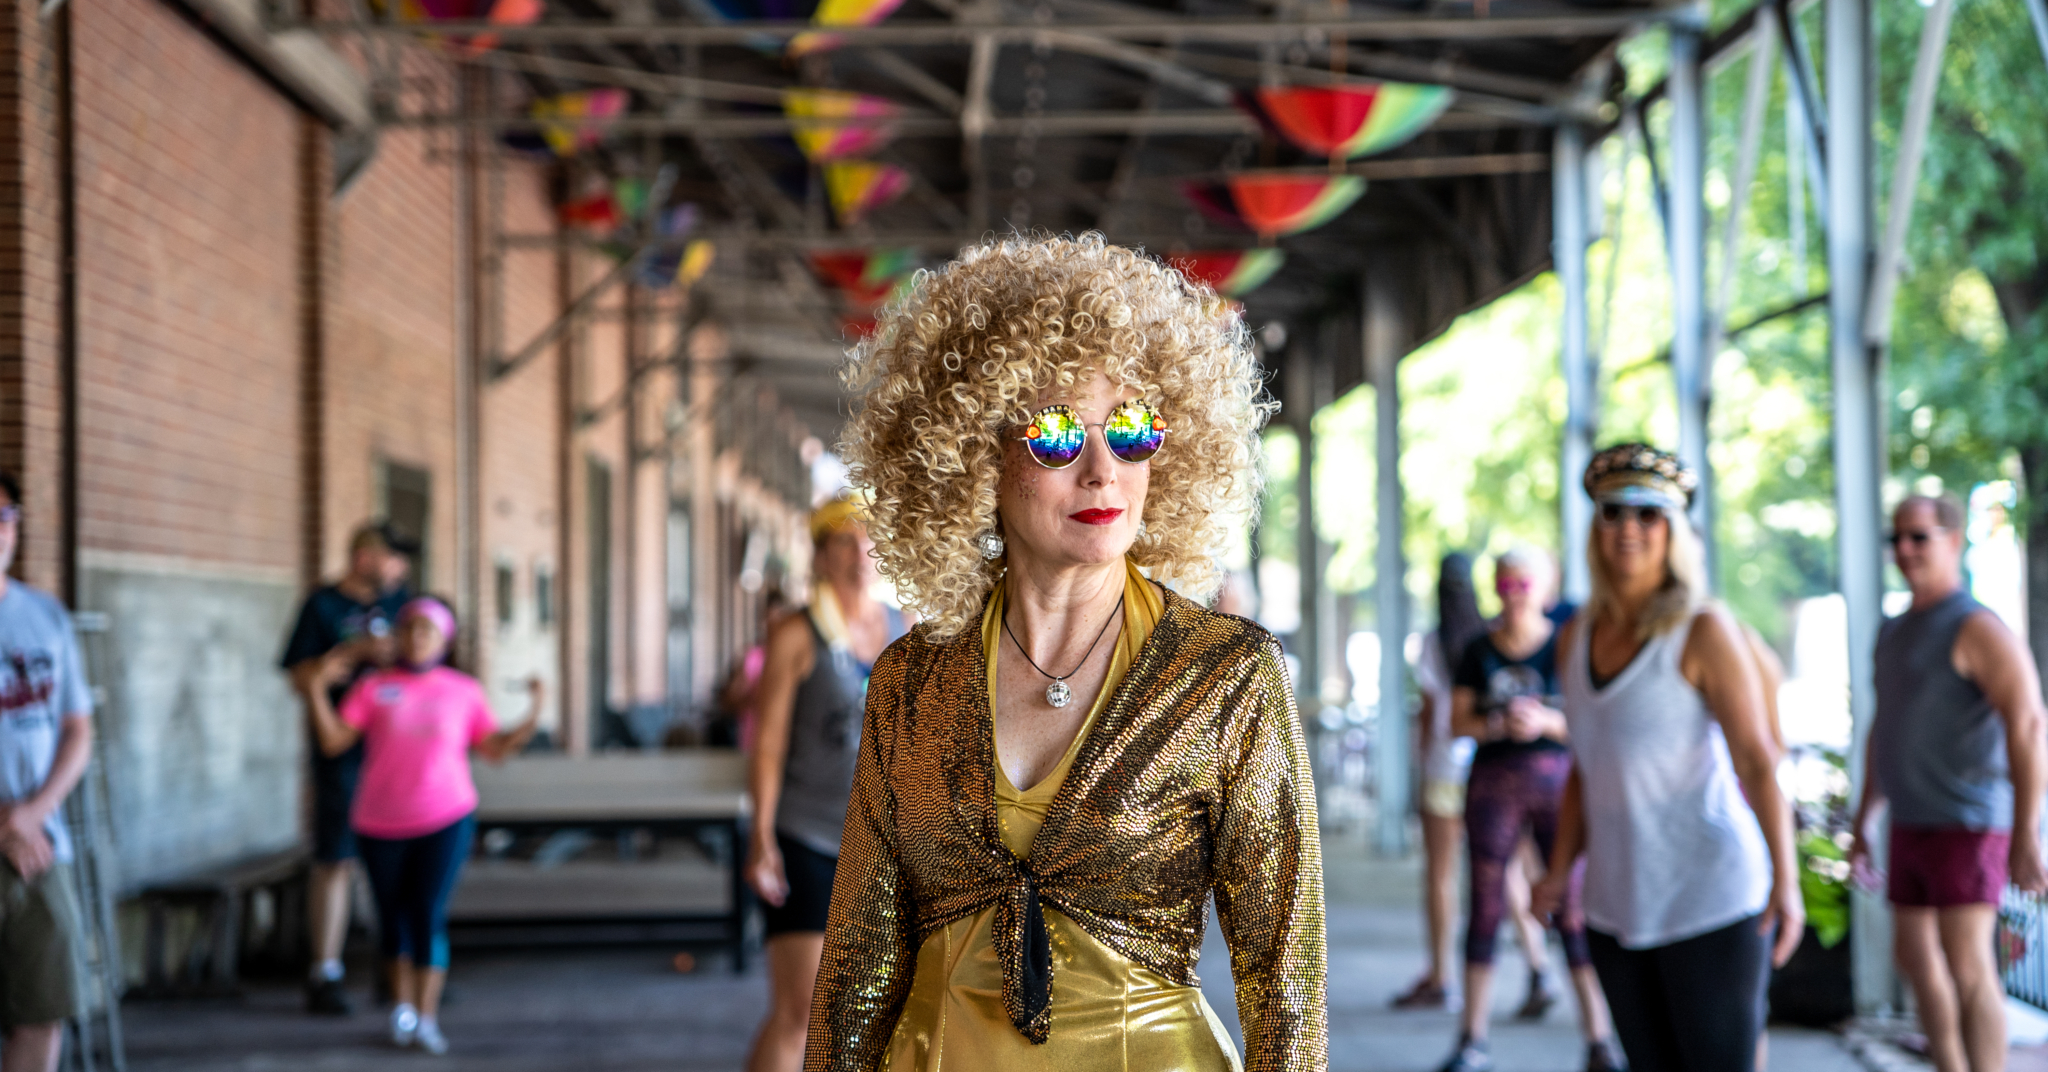 Meet the dance troupe keeping Disco alive in The Magic City